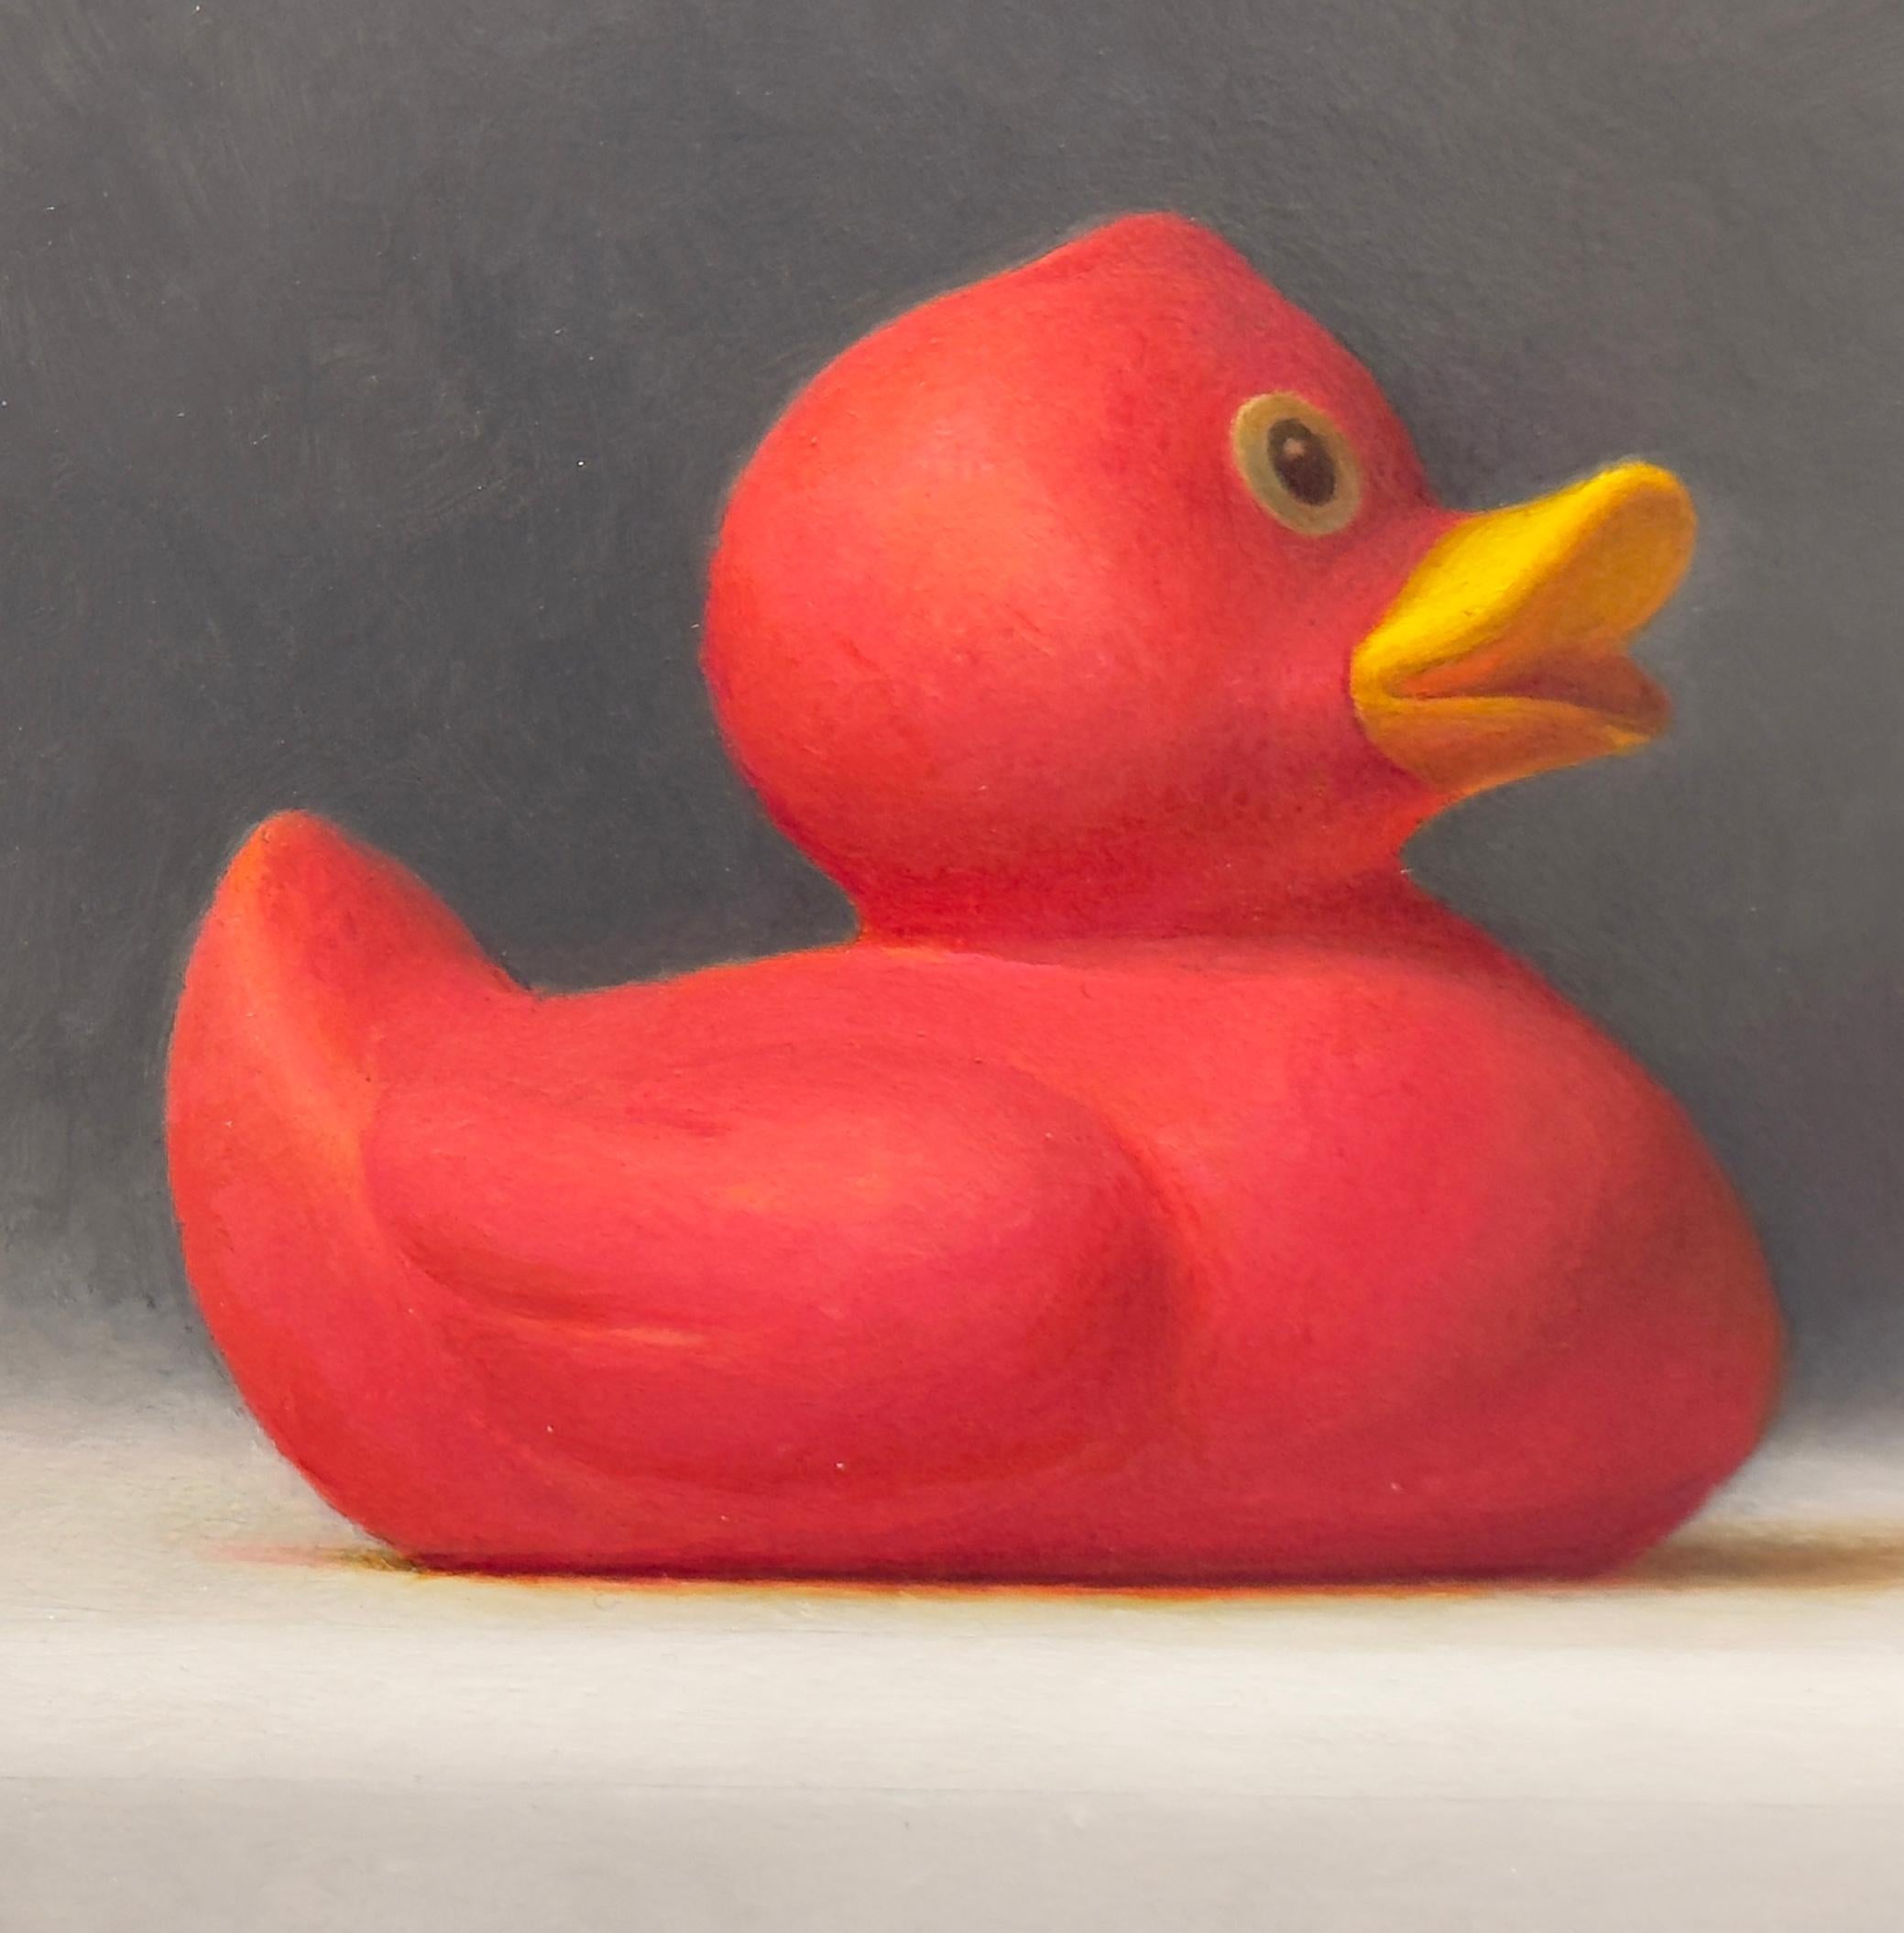 IMPOSTERS #25 (Dragon Fruit and Magenta Duck) - Realism, Toy, Humor For Sale 2